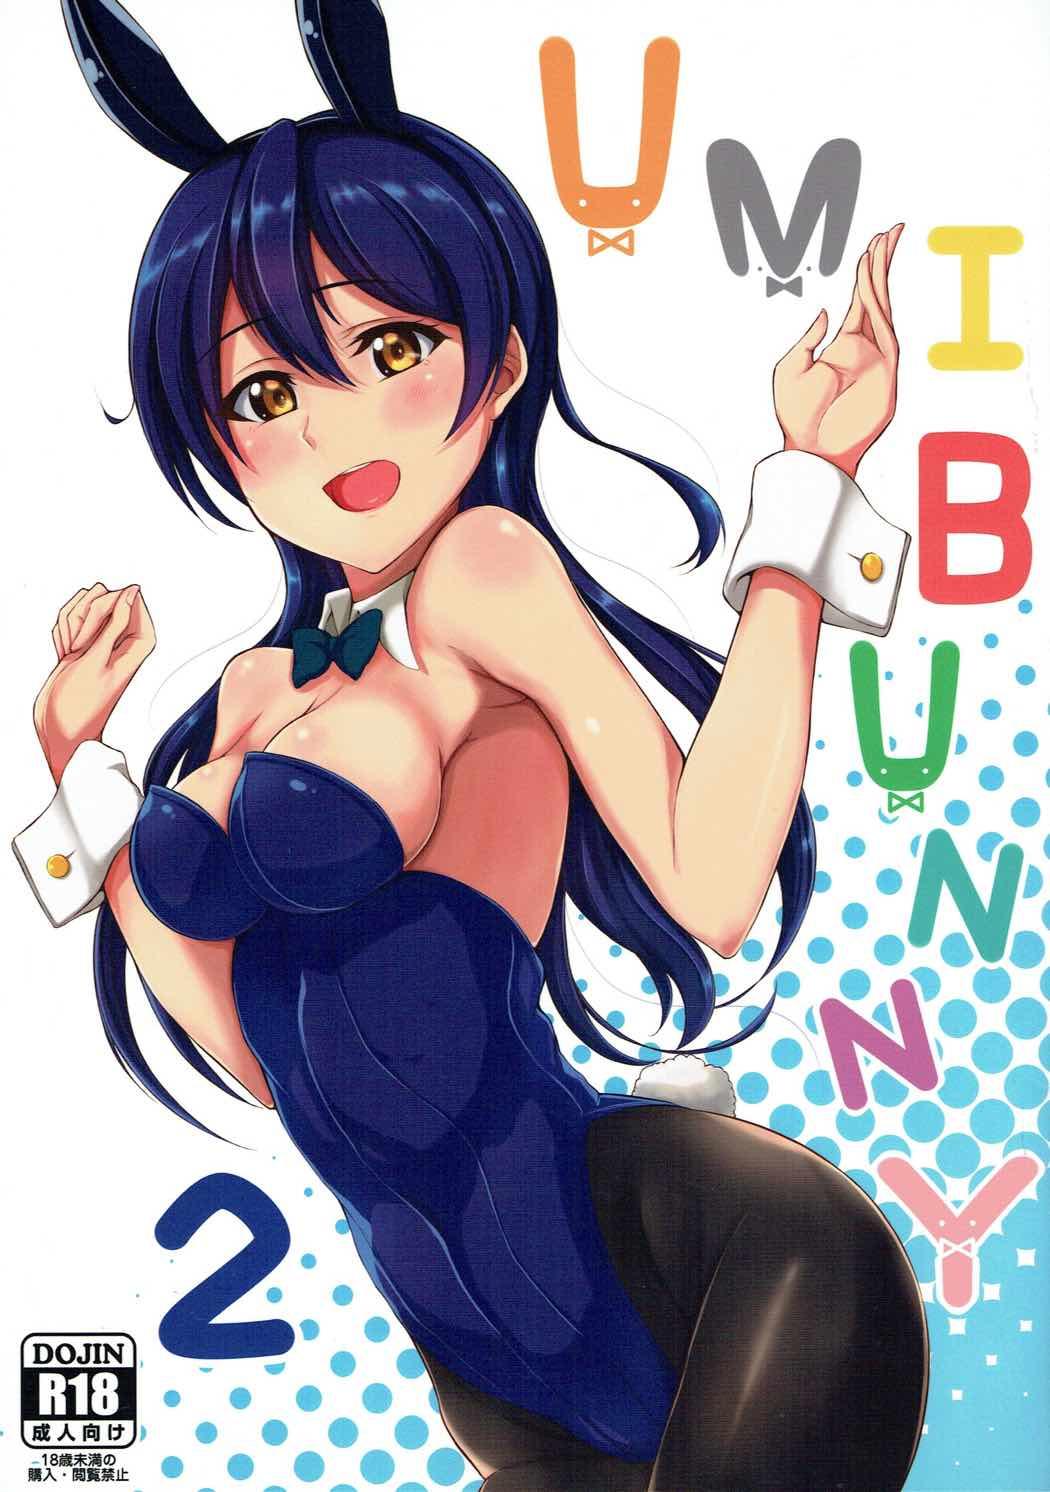 Hungarian UMI BUNNY 2 - Love live Assfucking - Picture 1